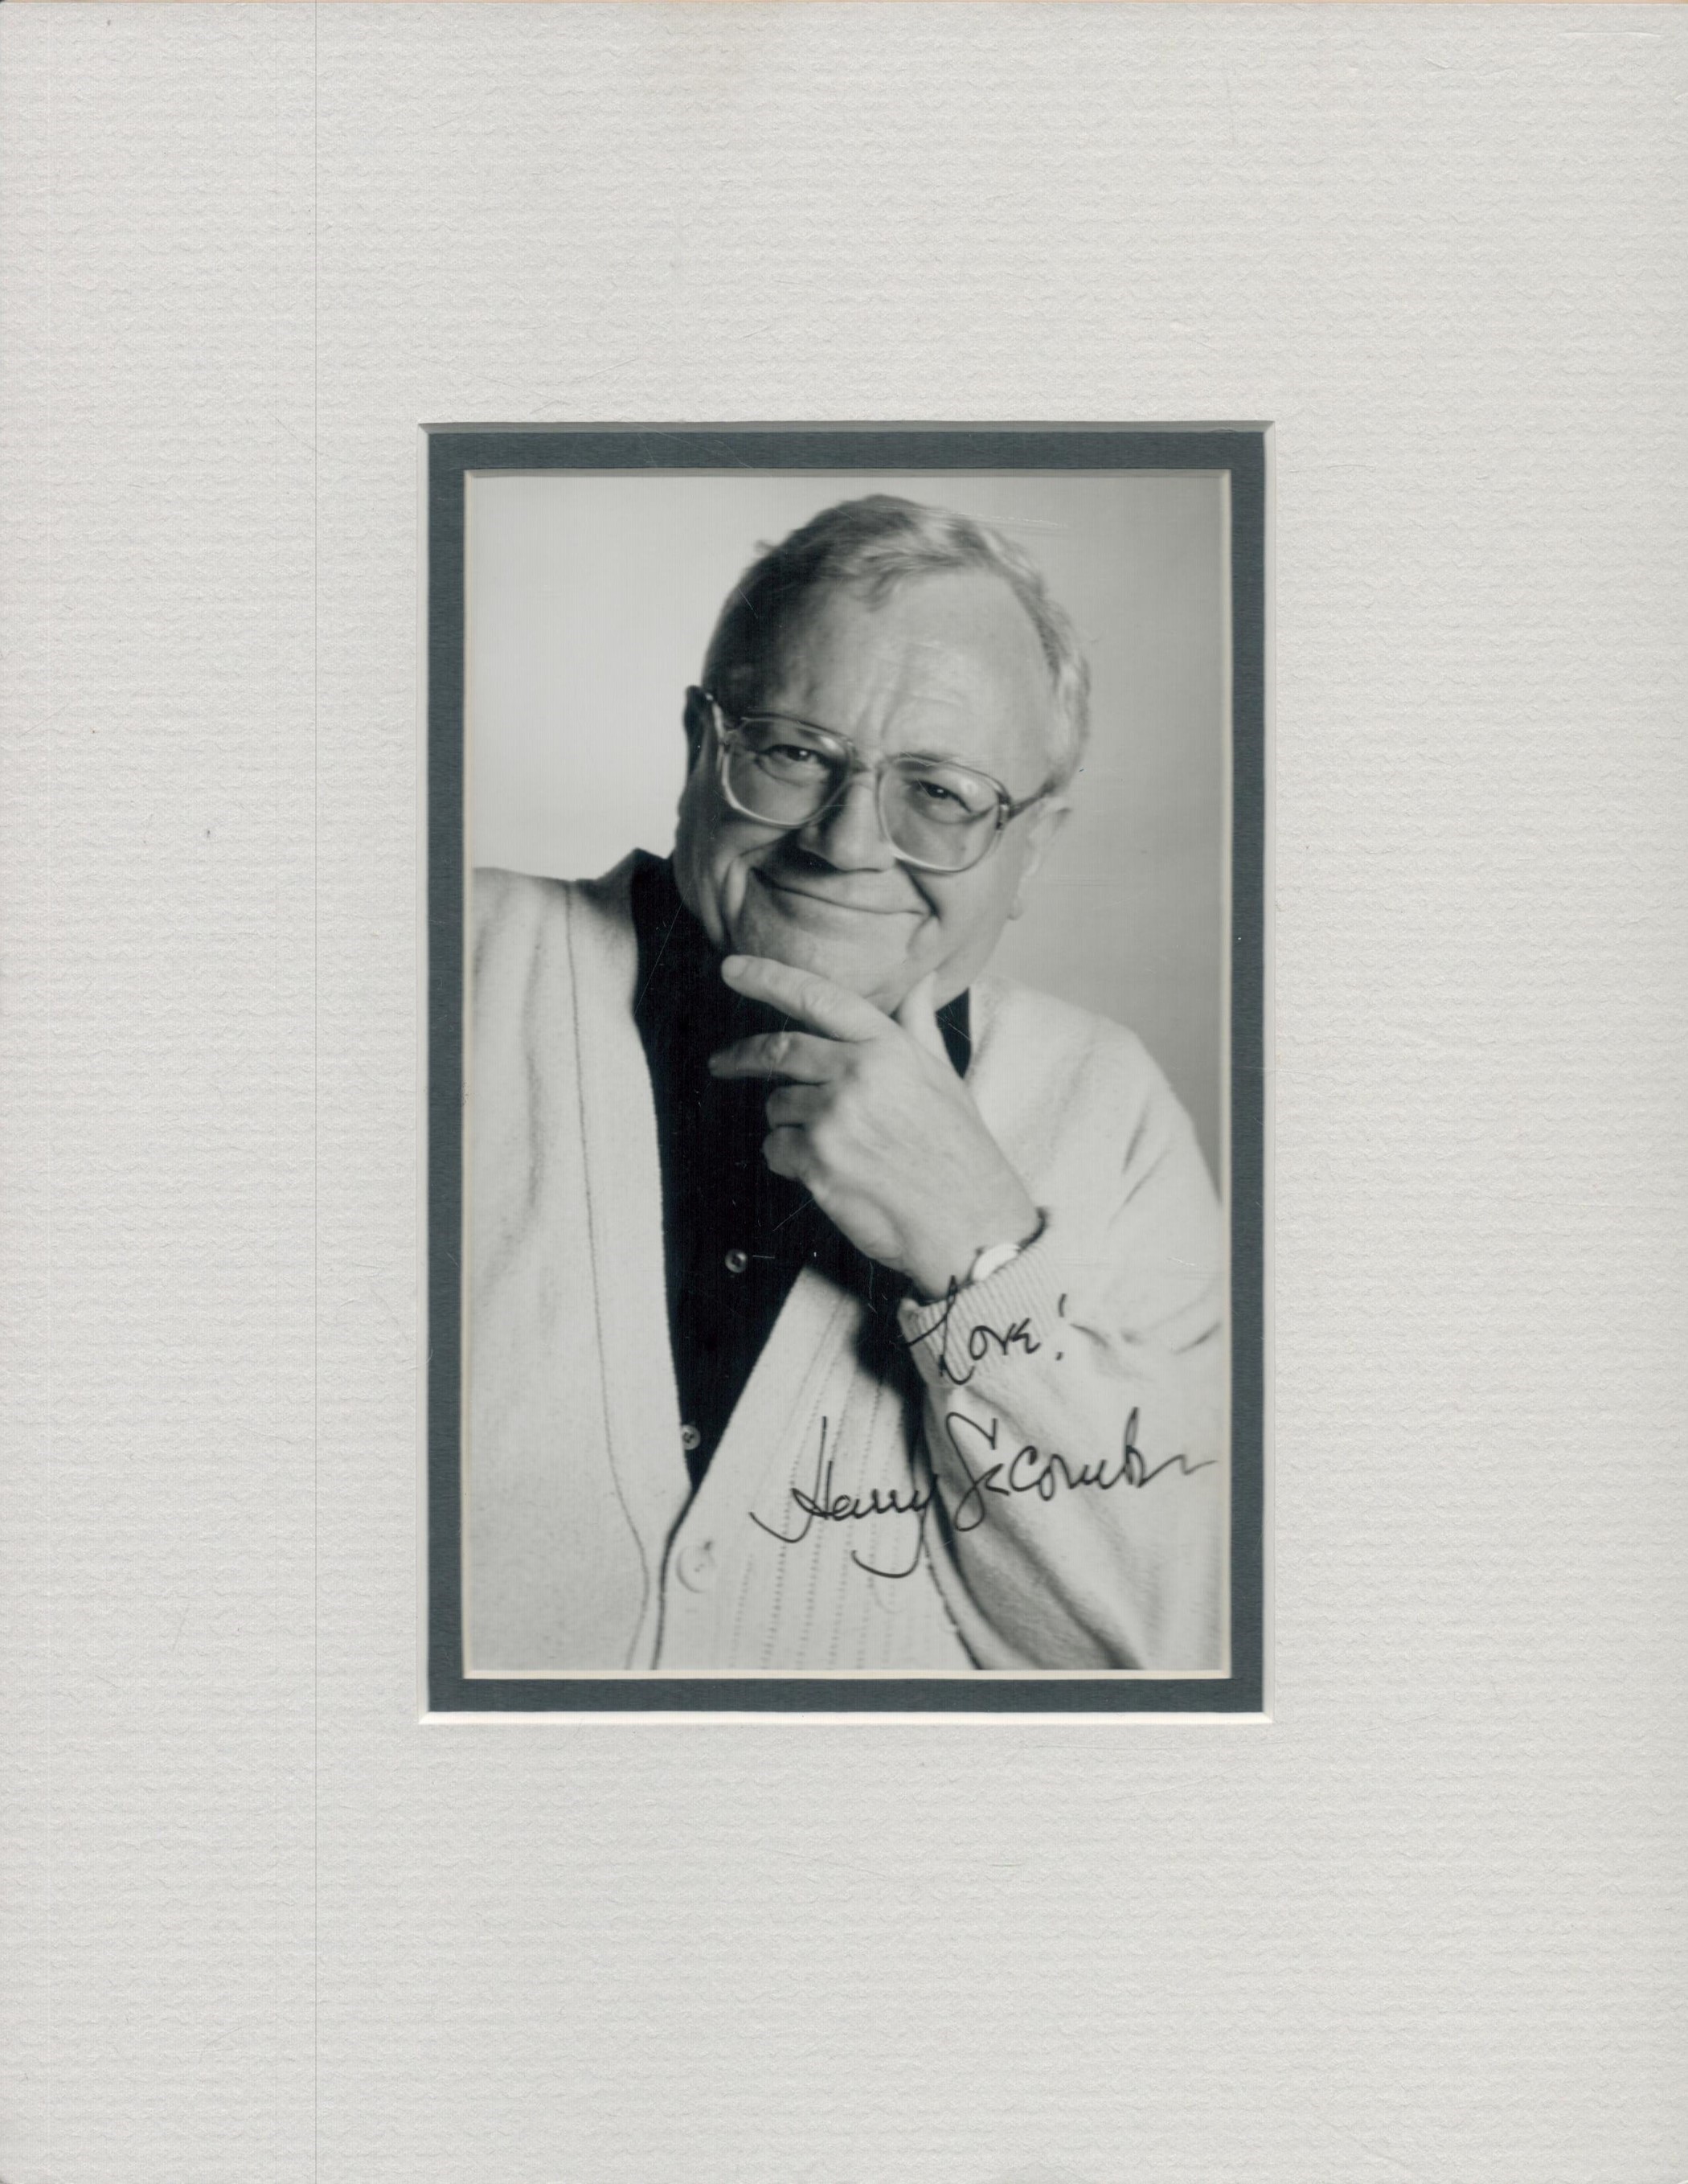 Harry Secombe signed small black and white photo, mounted to an overall size of 10 x 8 inches.